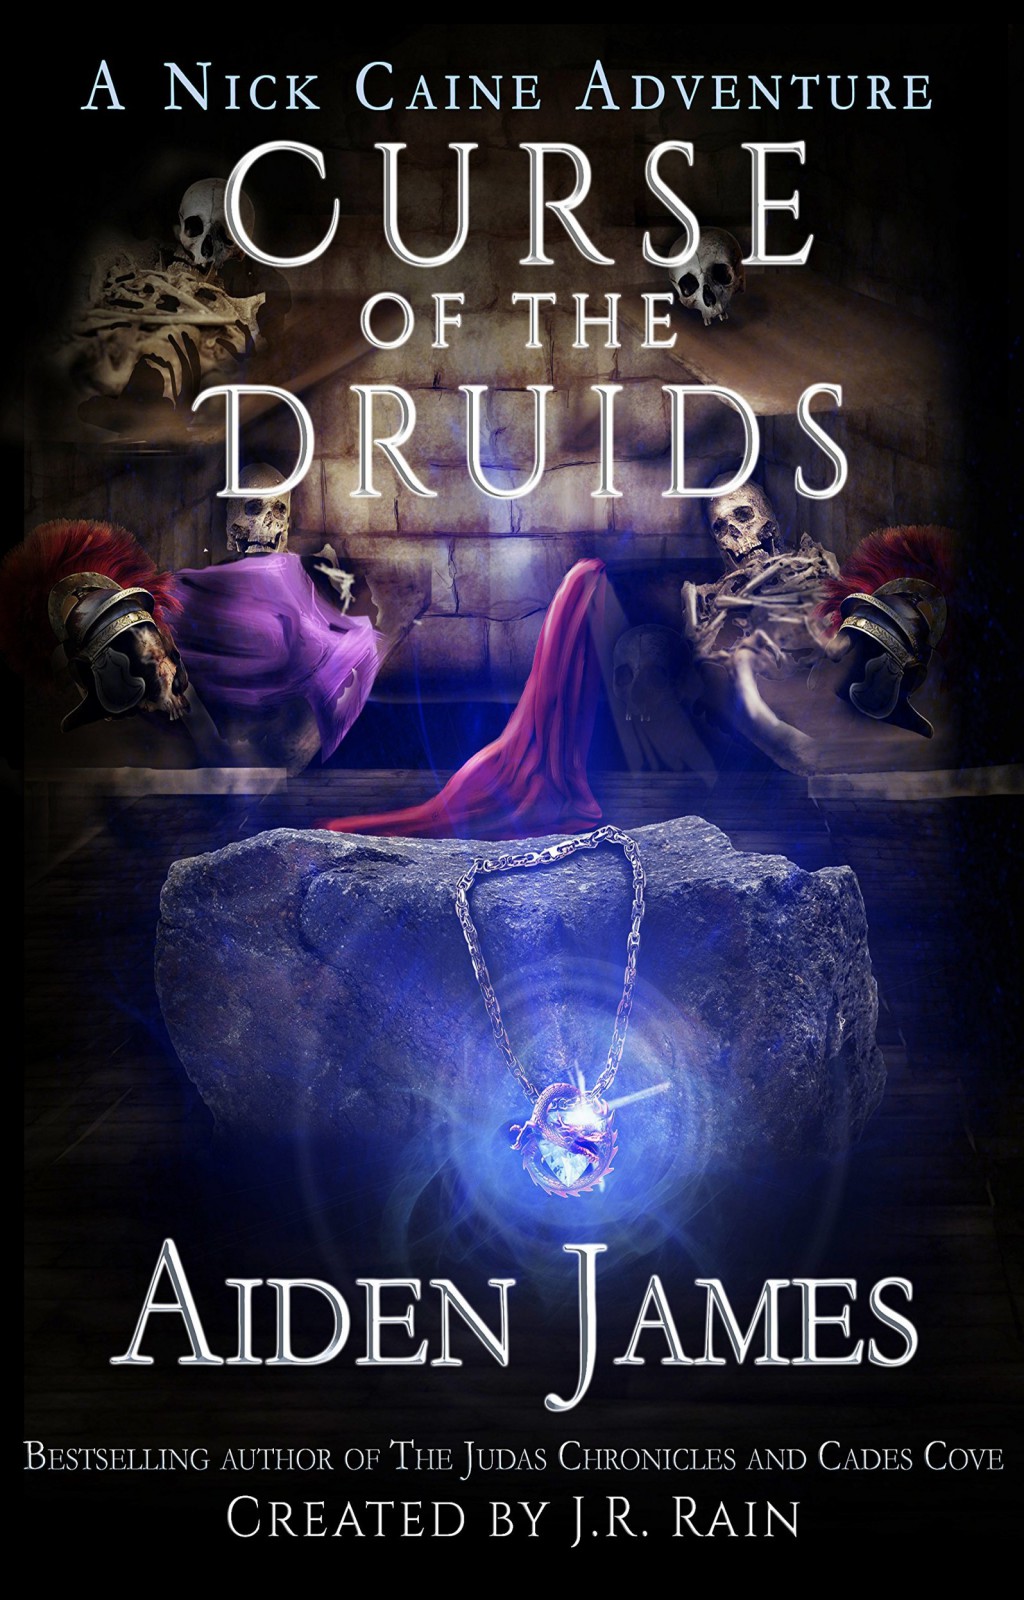 Curse of the Druids by Aiden James